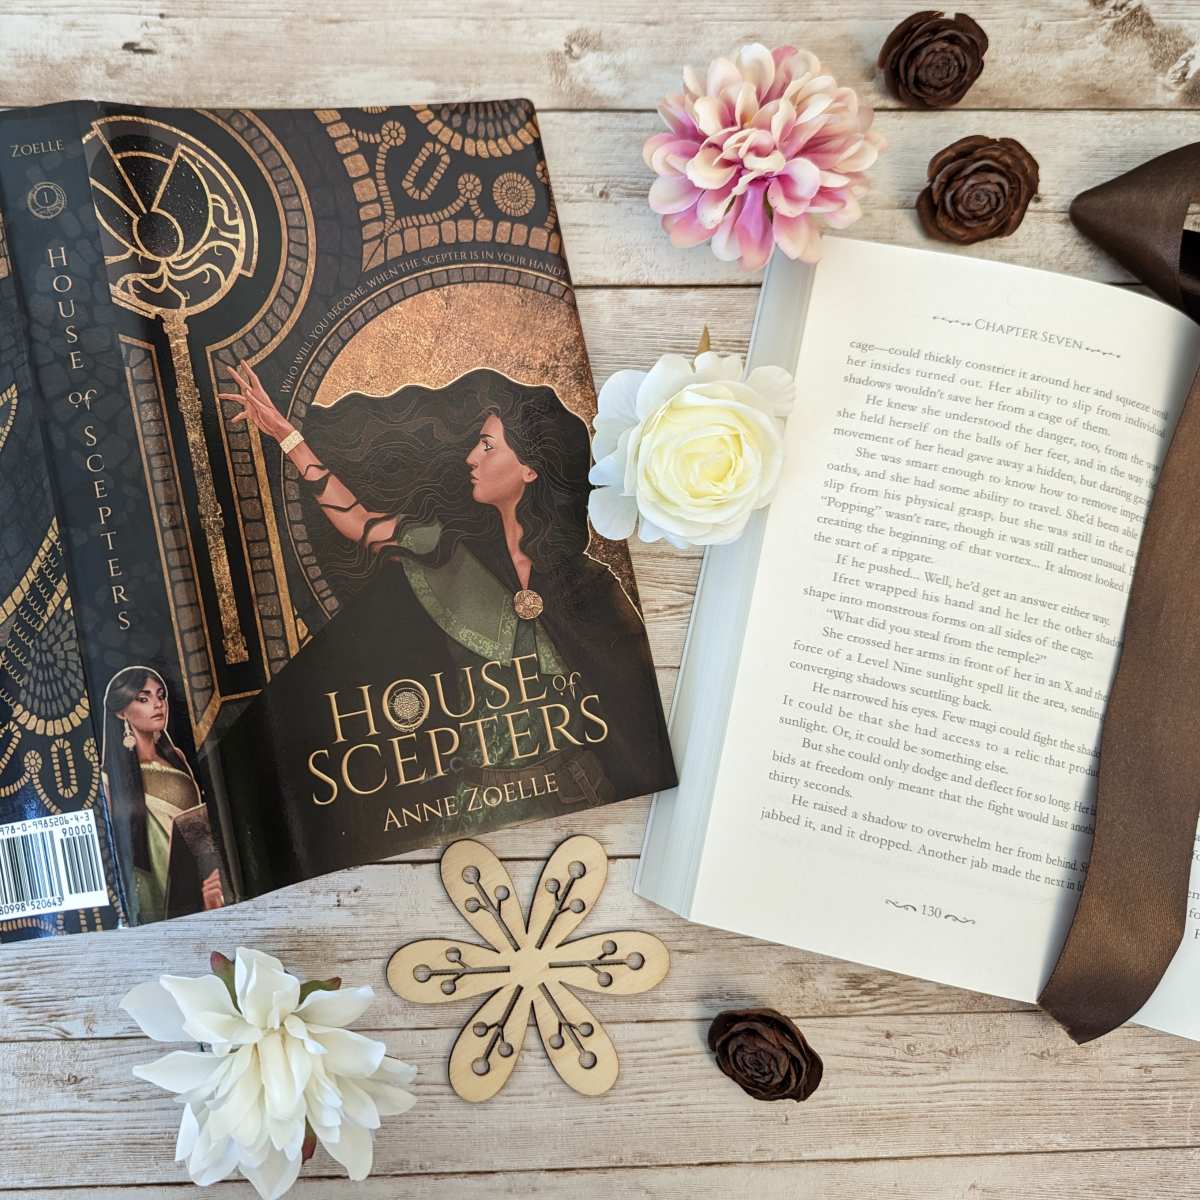 House of Scepters flatlay spread and interior